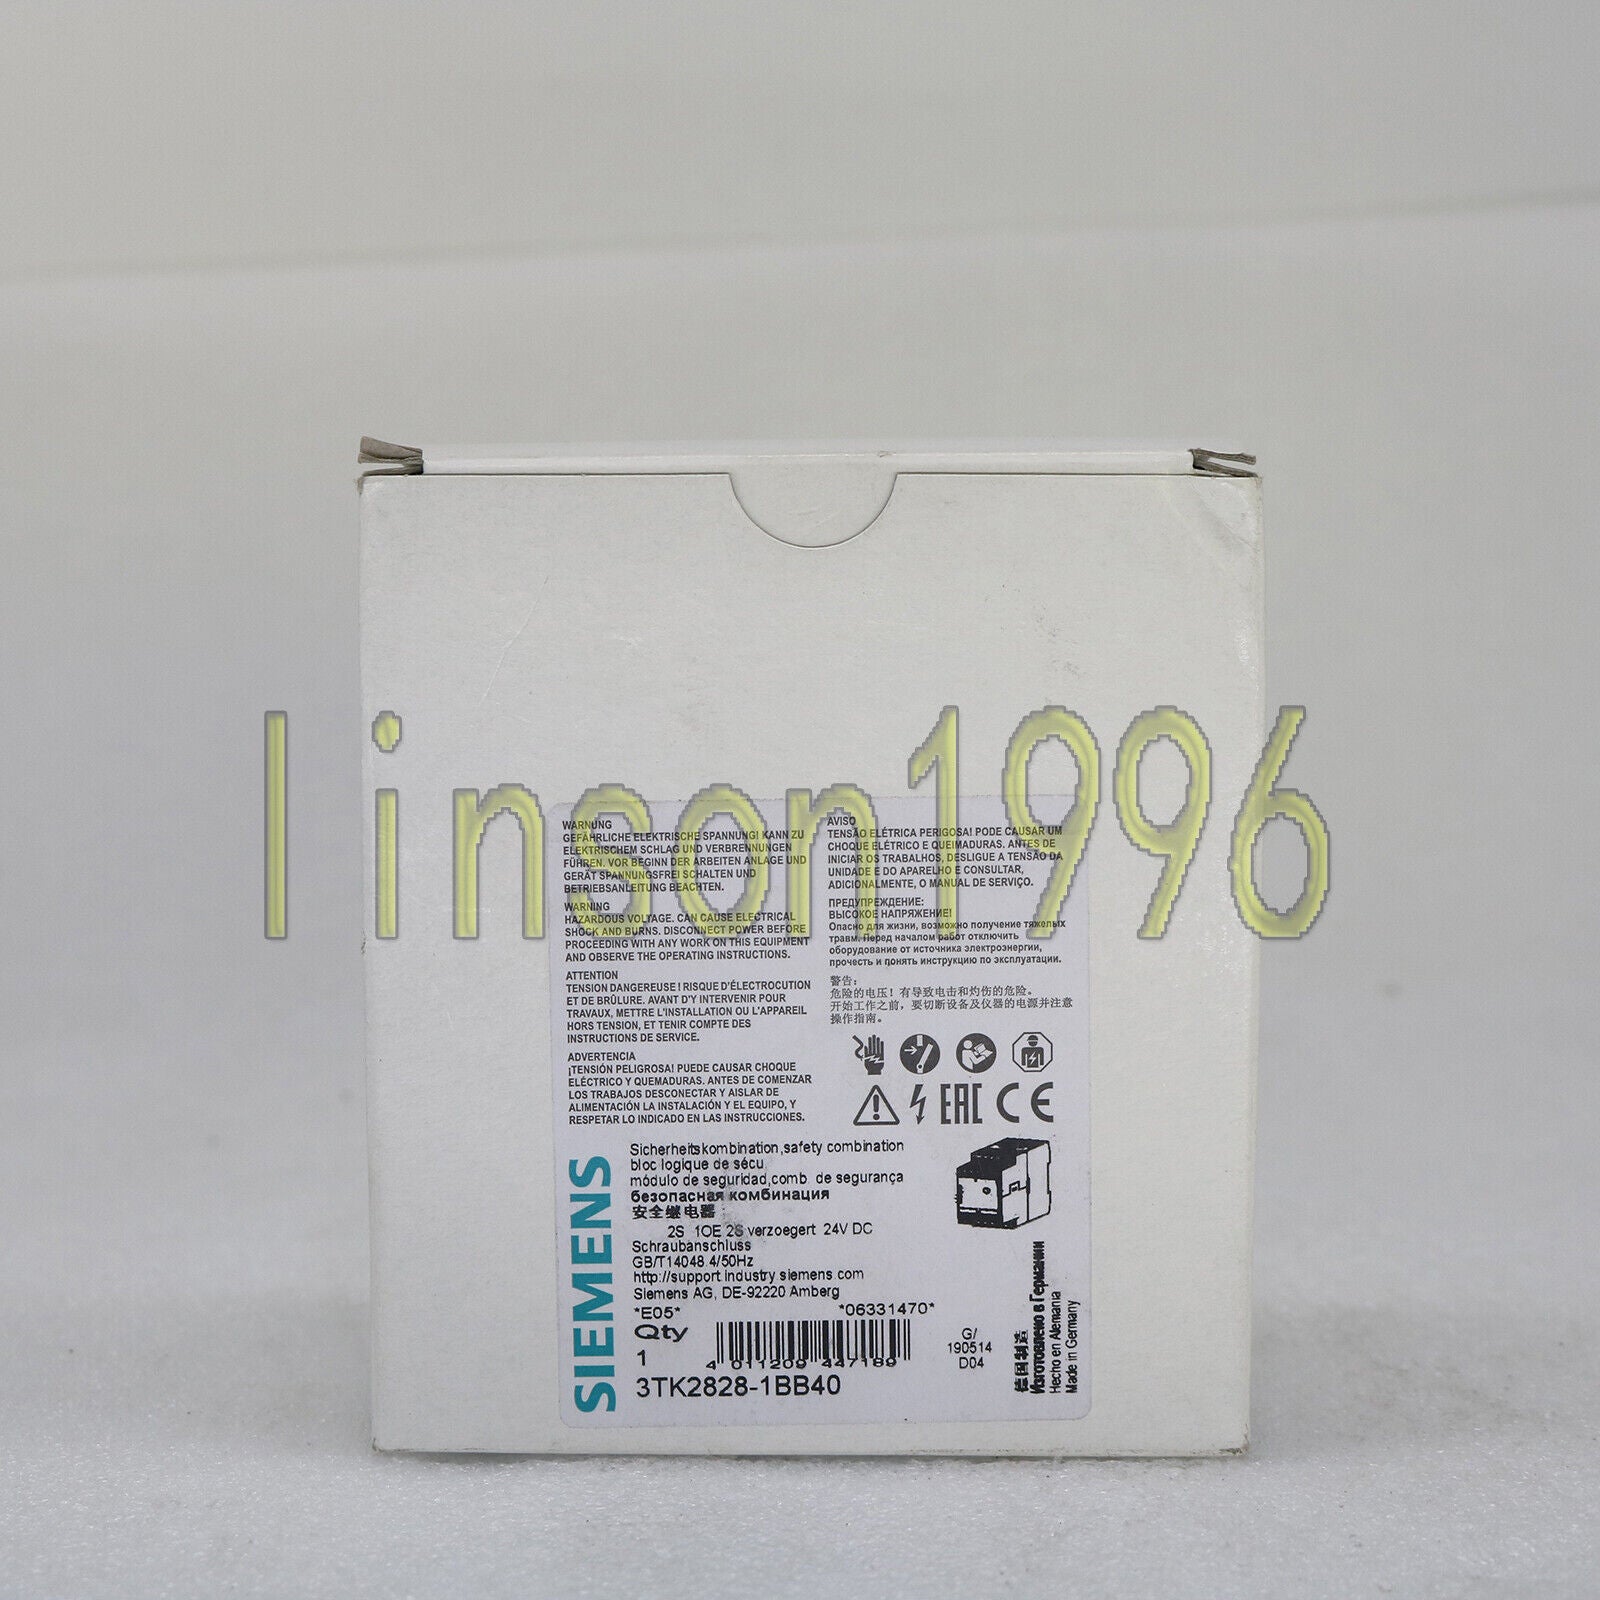 new ONE  Siemens safety relay 3TK2828-1BB40 in box one year